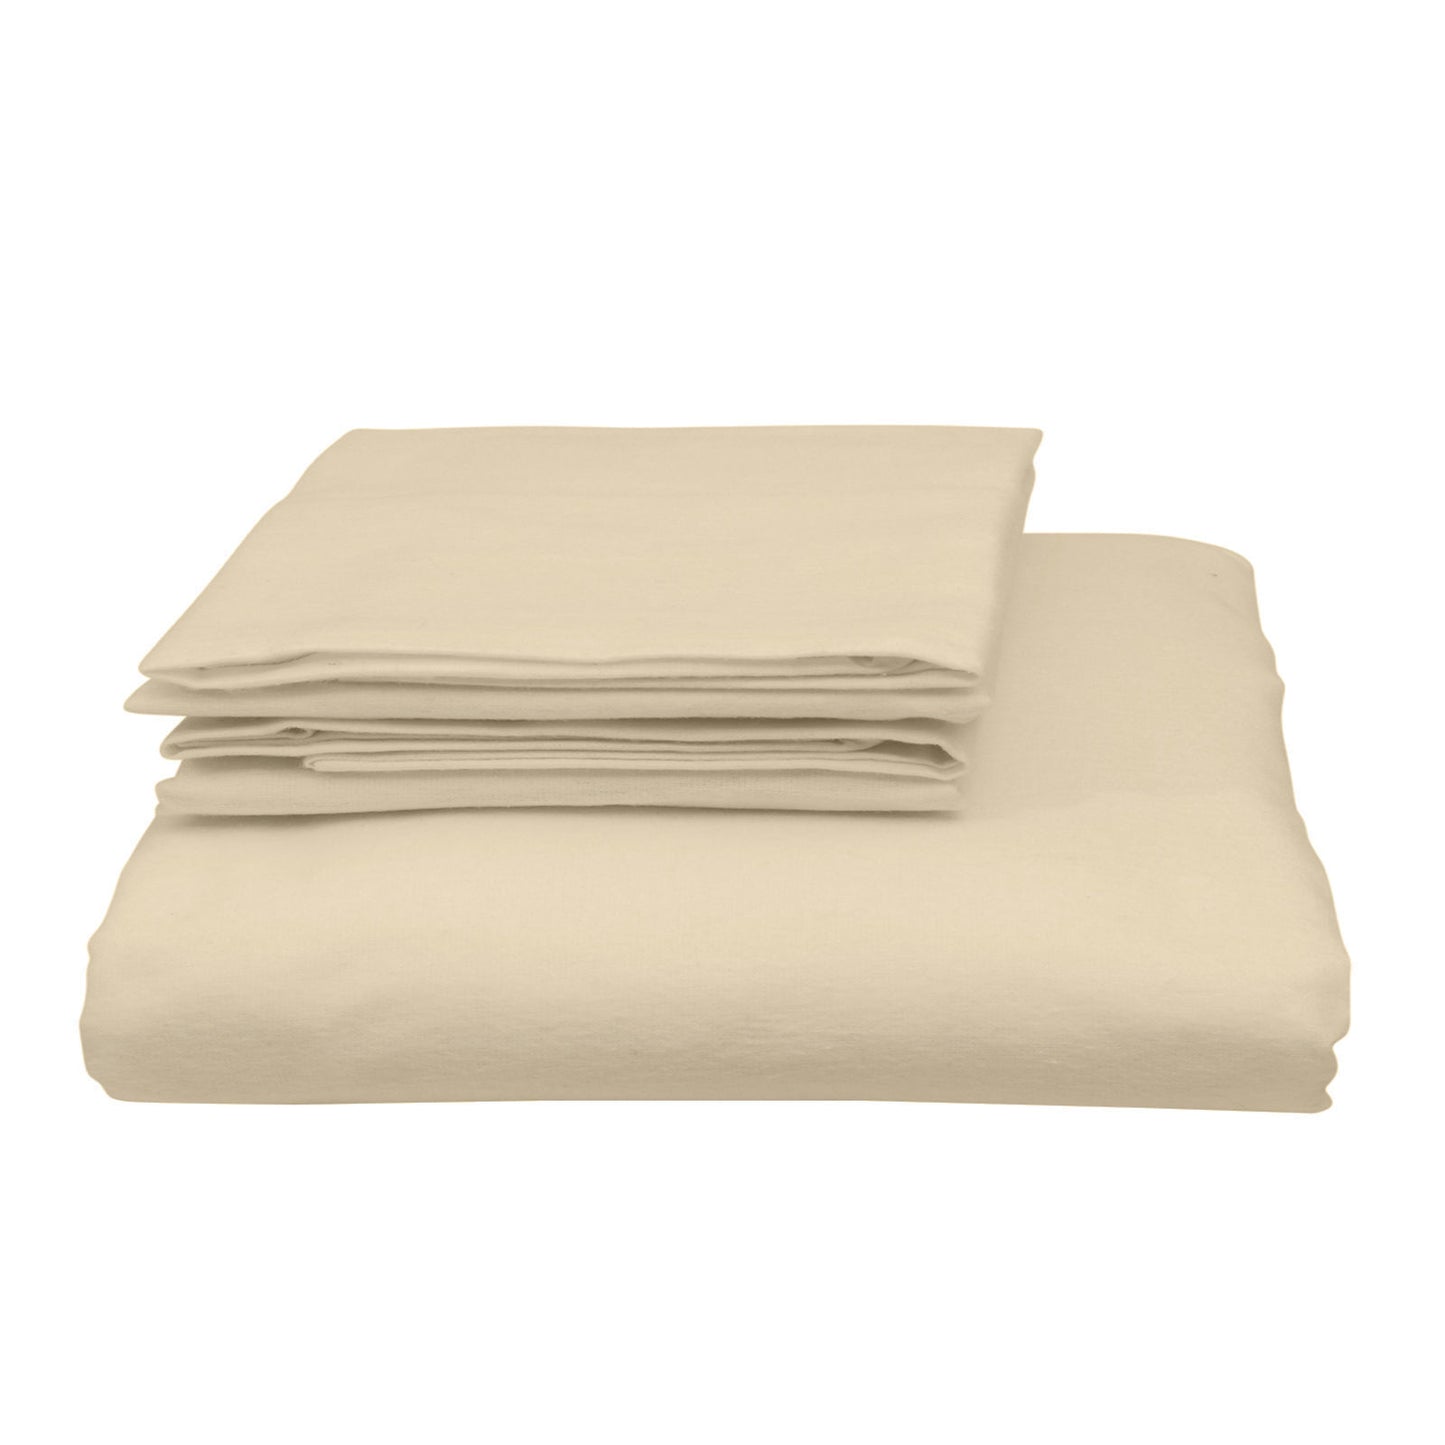 DOUBLE 1000TC 3-Piece Blended Bamboo Quilt Cover Sets - Beige